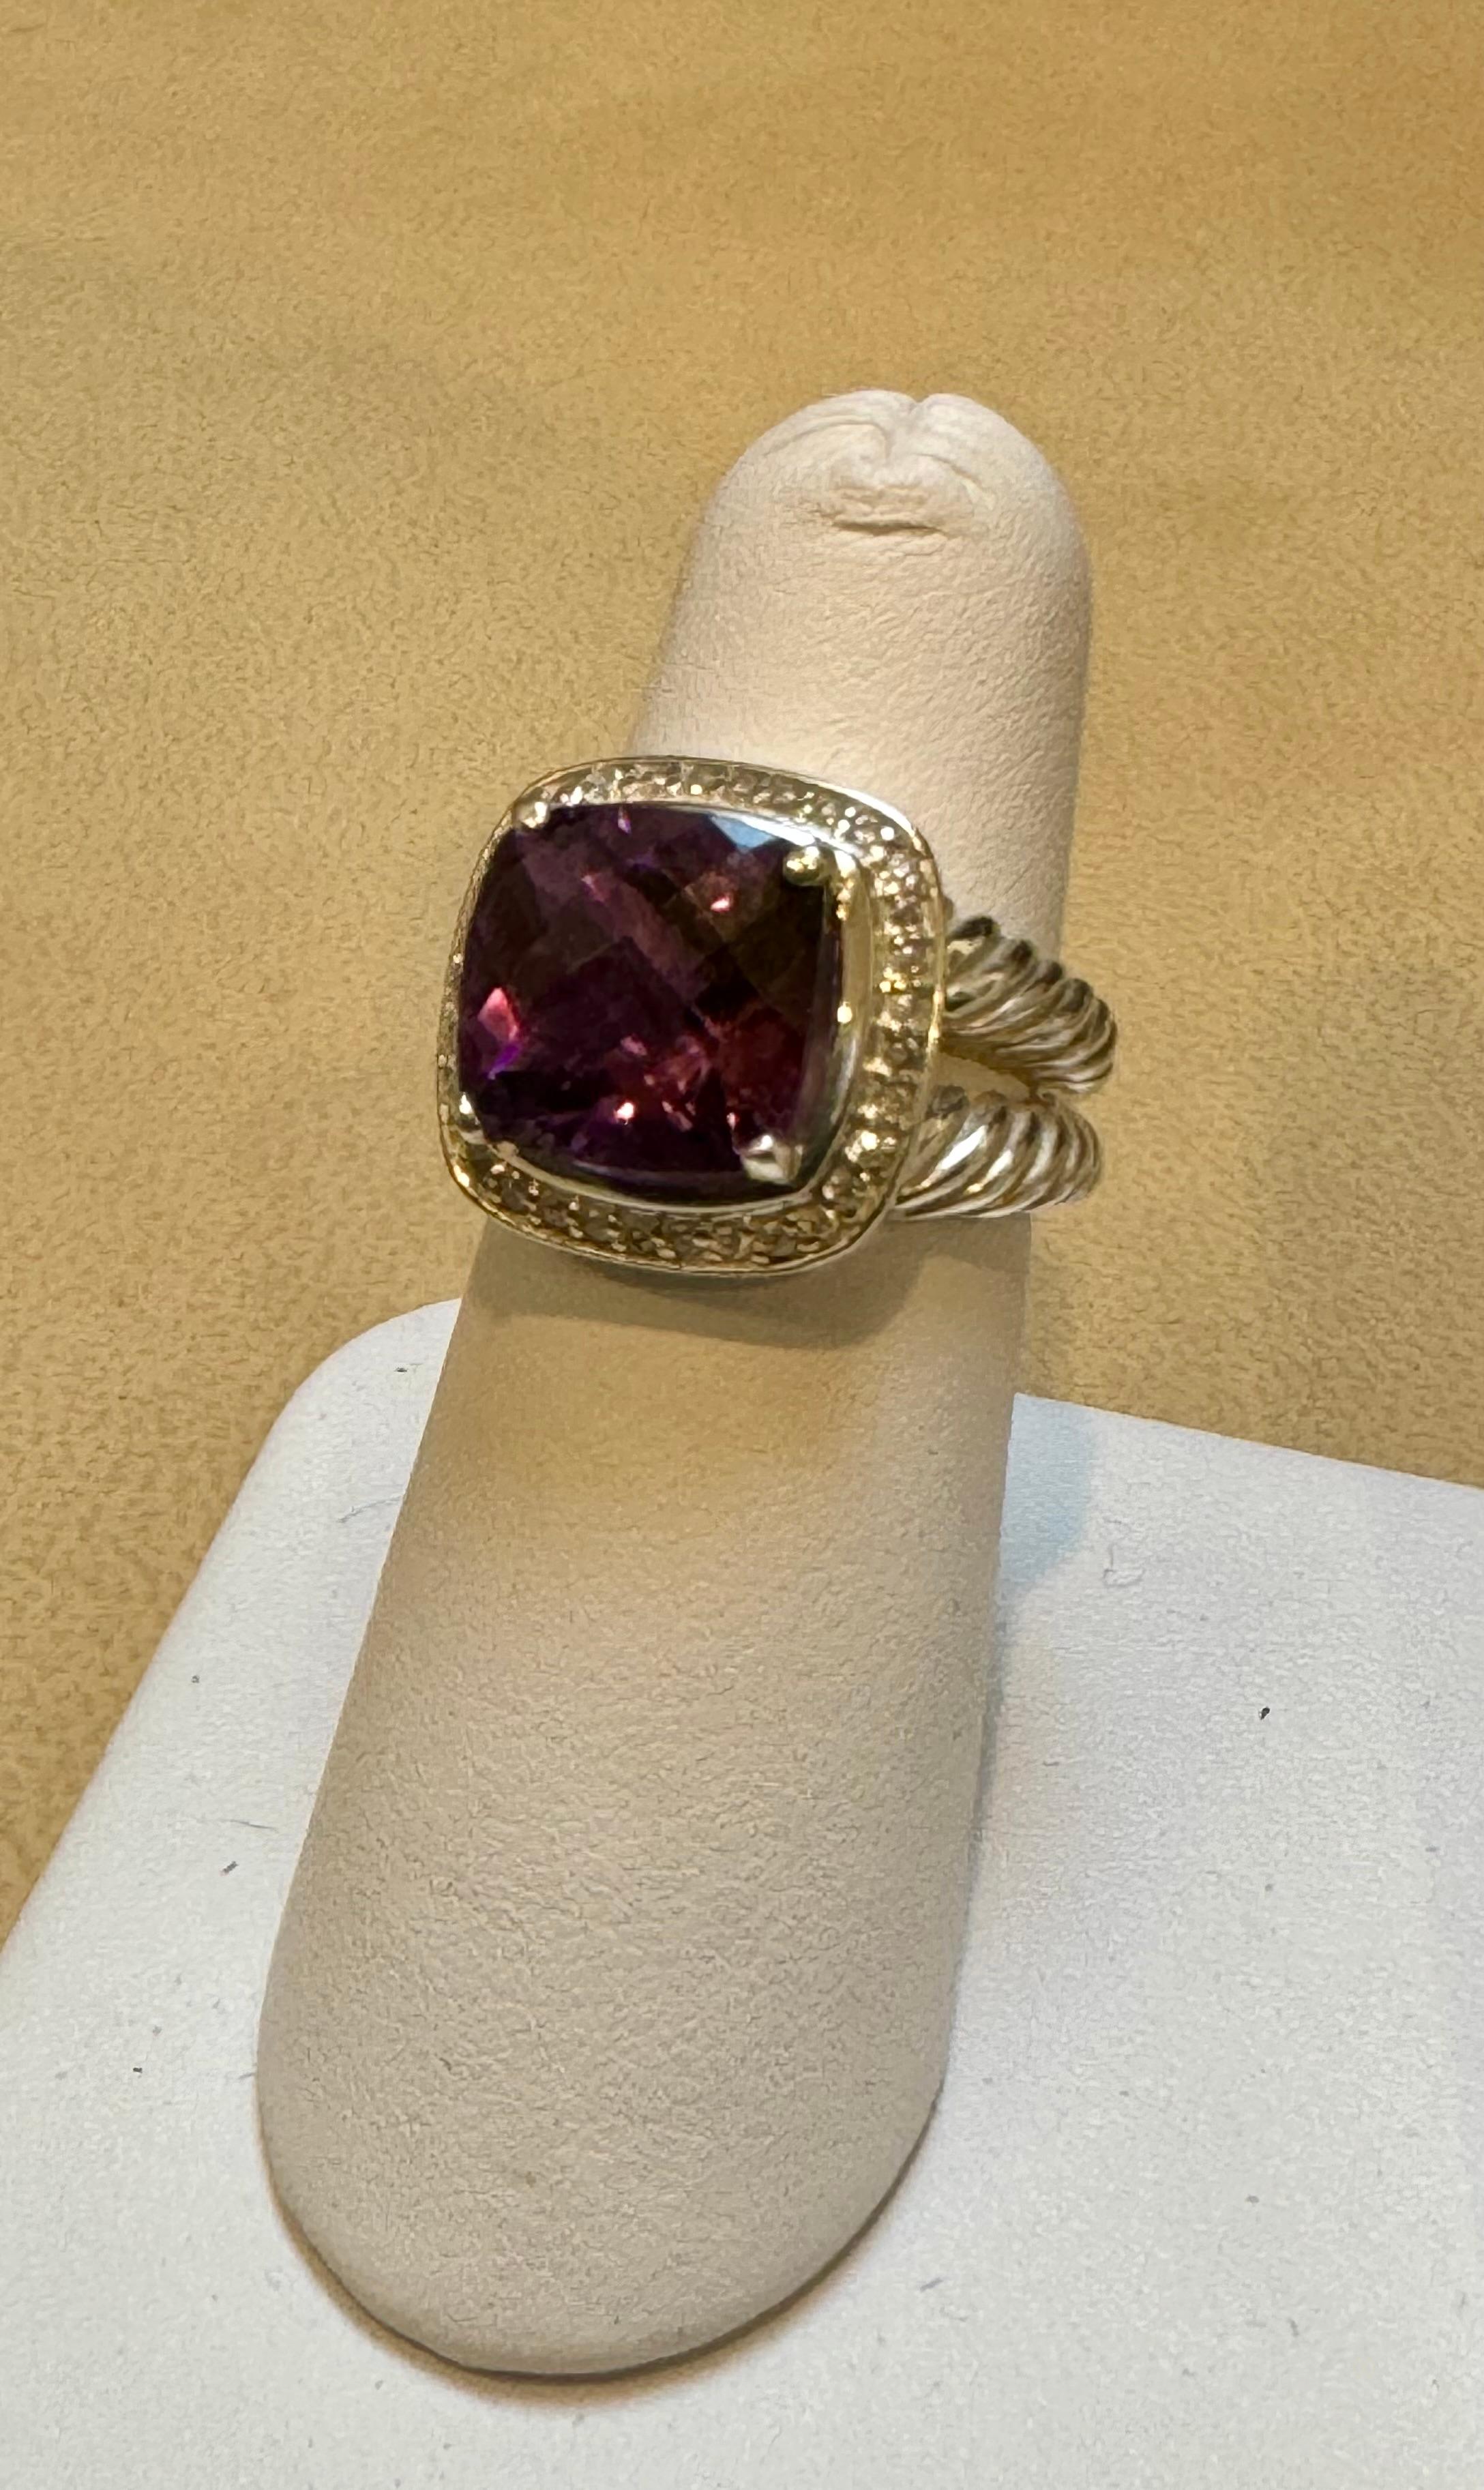 An estate David Yurman Amethyst ring with diamond accents.
Sterling silver 
This beautiful authentic ring is by David Yurman from the his Collection. Crafted from sterling silver featuring split cable shank with smooth polished cushion shape bridge,